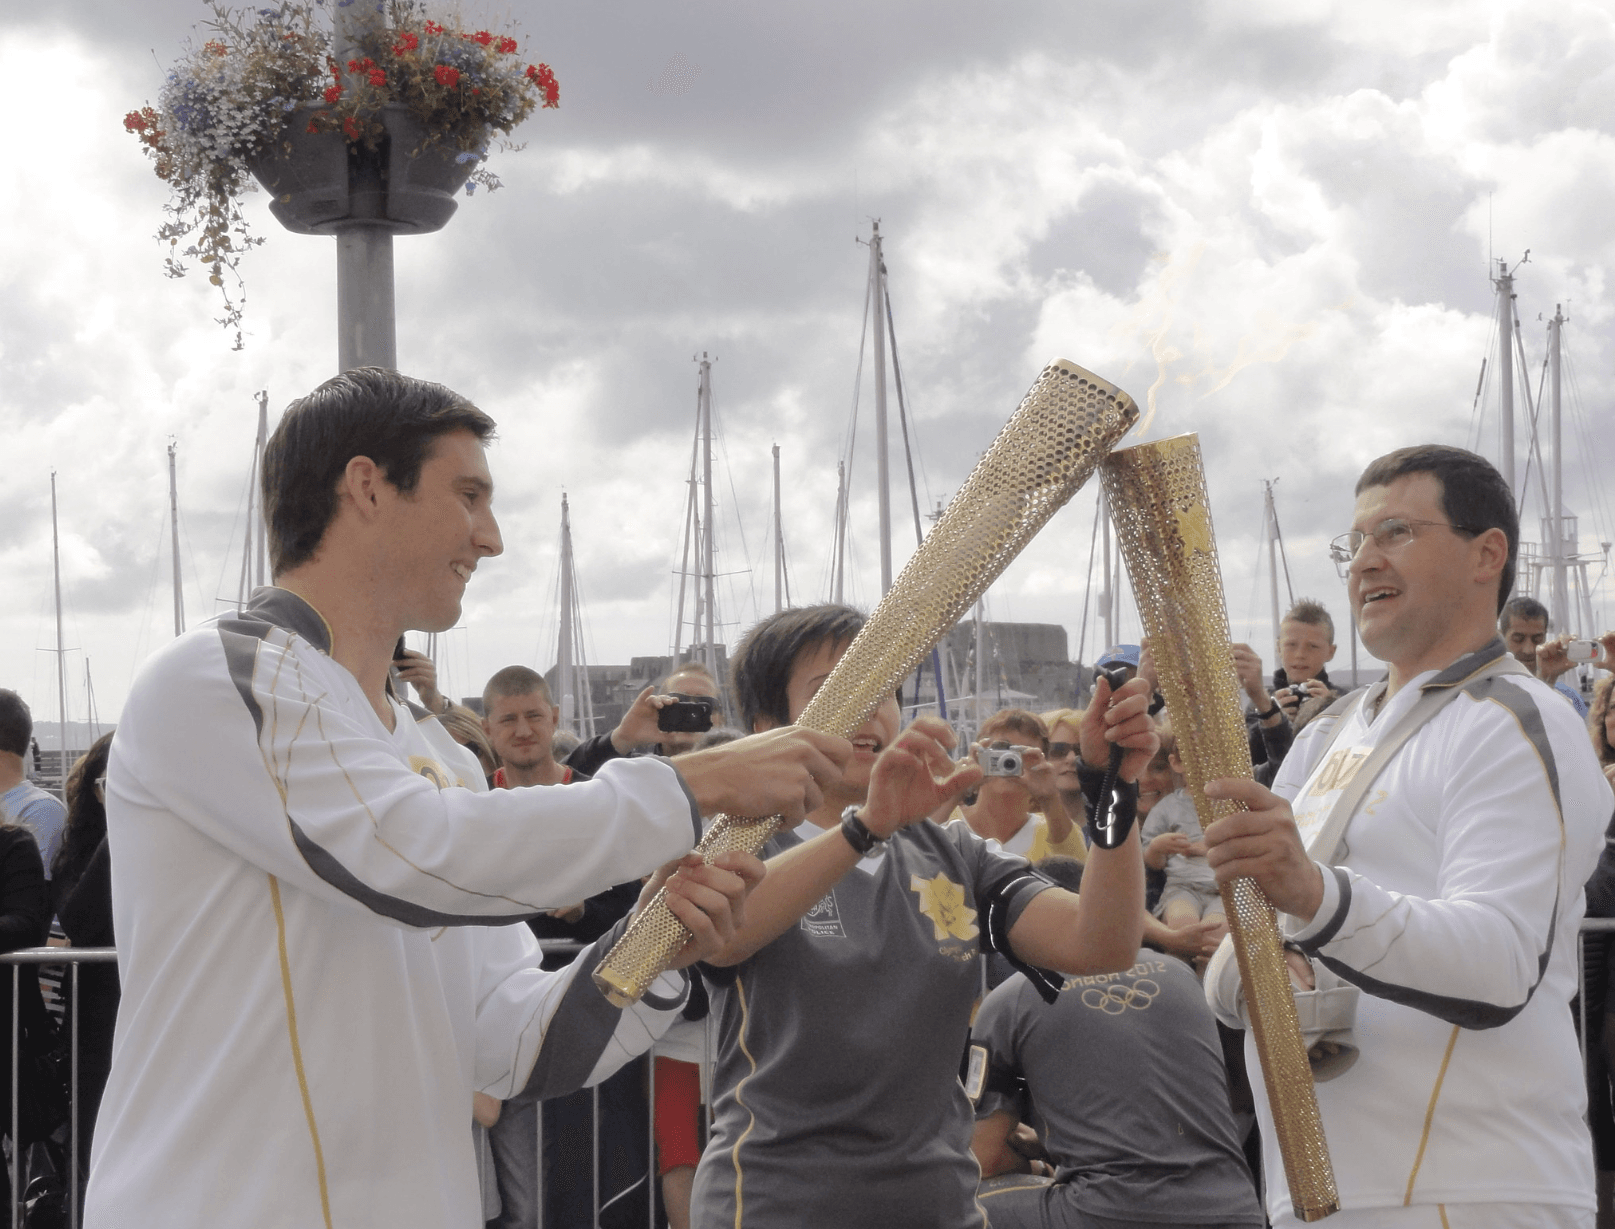 Image of two men in white track suits passing the Olympic fire from golden torches in front of a crowd and cloudy sky.